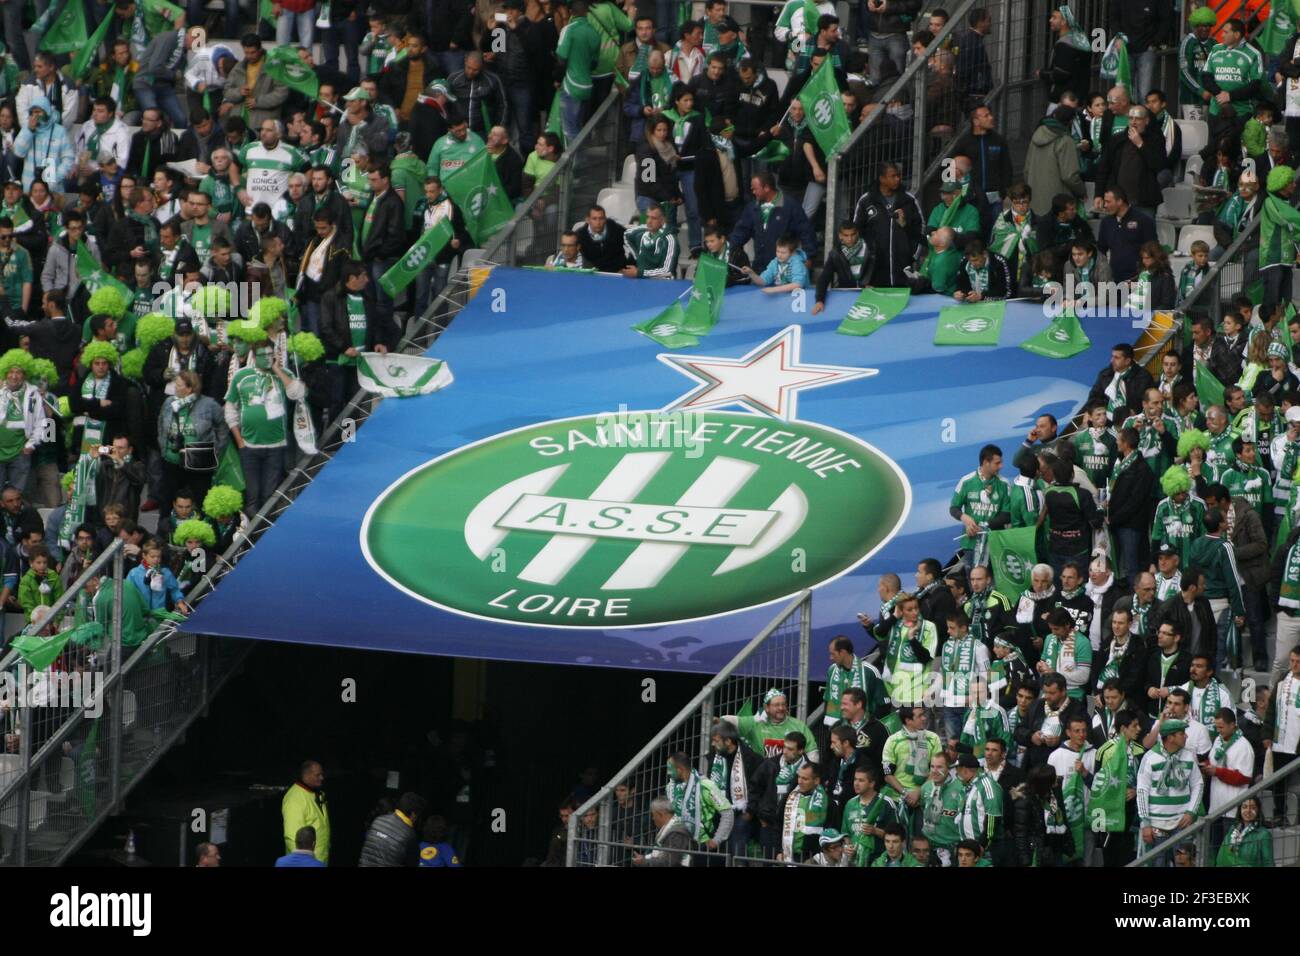 FOOTBALL - FRENCH LEAGUE CUP 2012/2013 - FINAL - AS SAINT ETIENNE v STADE RENNAIS - 20/04/2013 - SAINT DENIS (FRA) - PHOTO DIDIER RAVON / DPPI - FANS SAINT ETIENNE IN STAND OF STADE DE FRANCE DURING THE MATCH Stock Photo